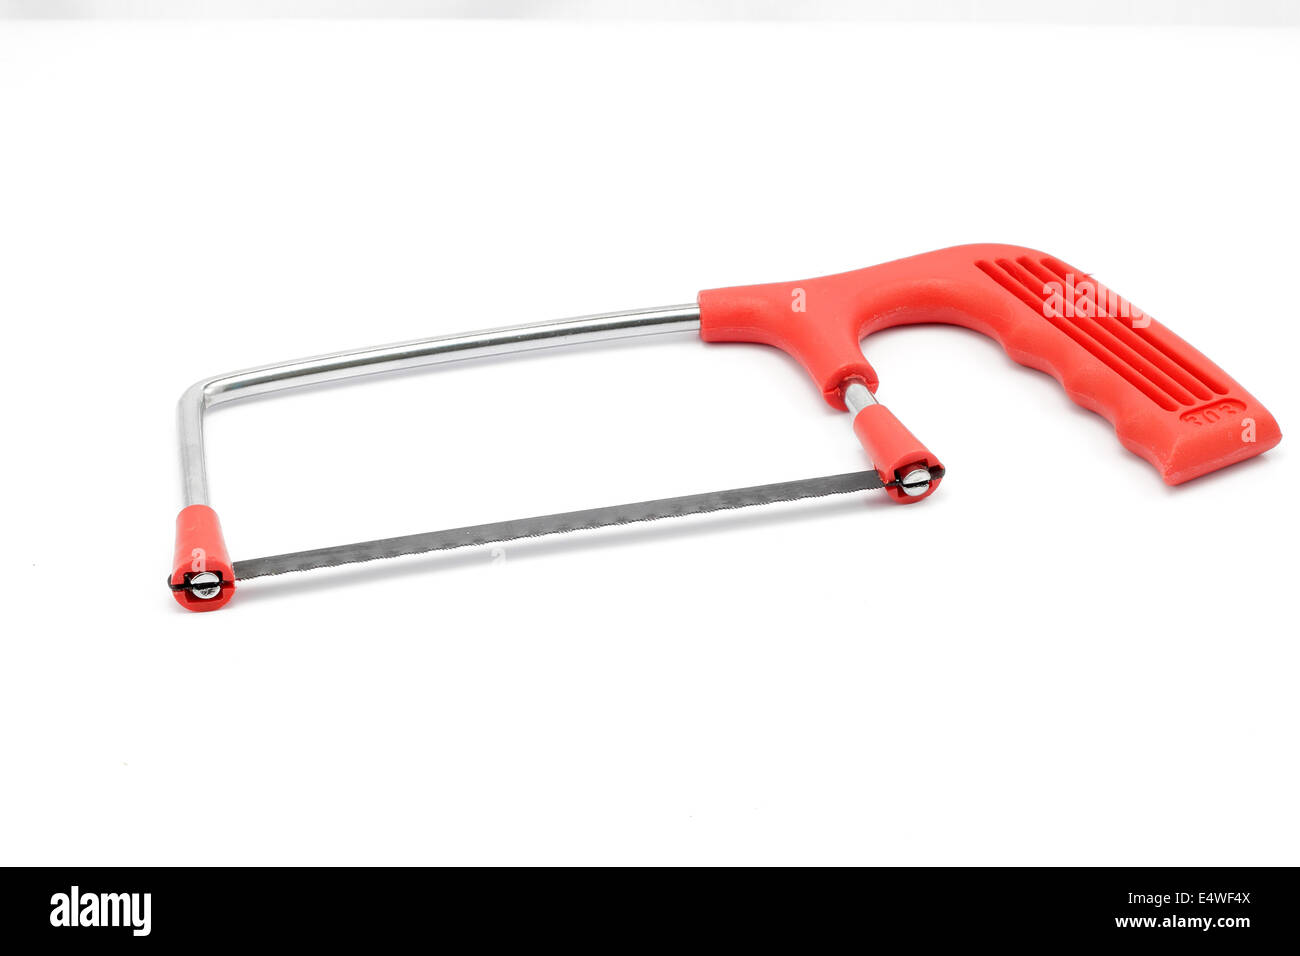 Red handle saw in white isolated background Stock Photo